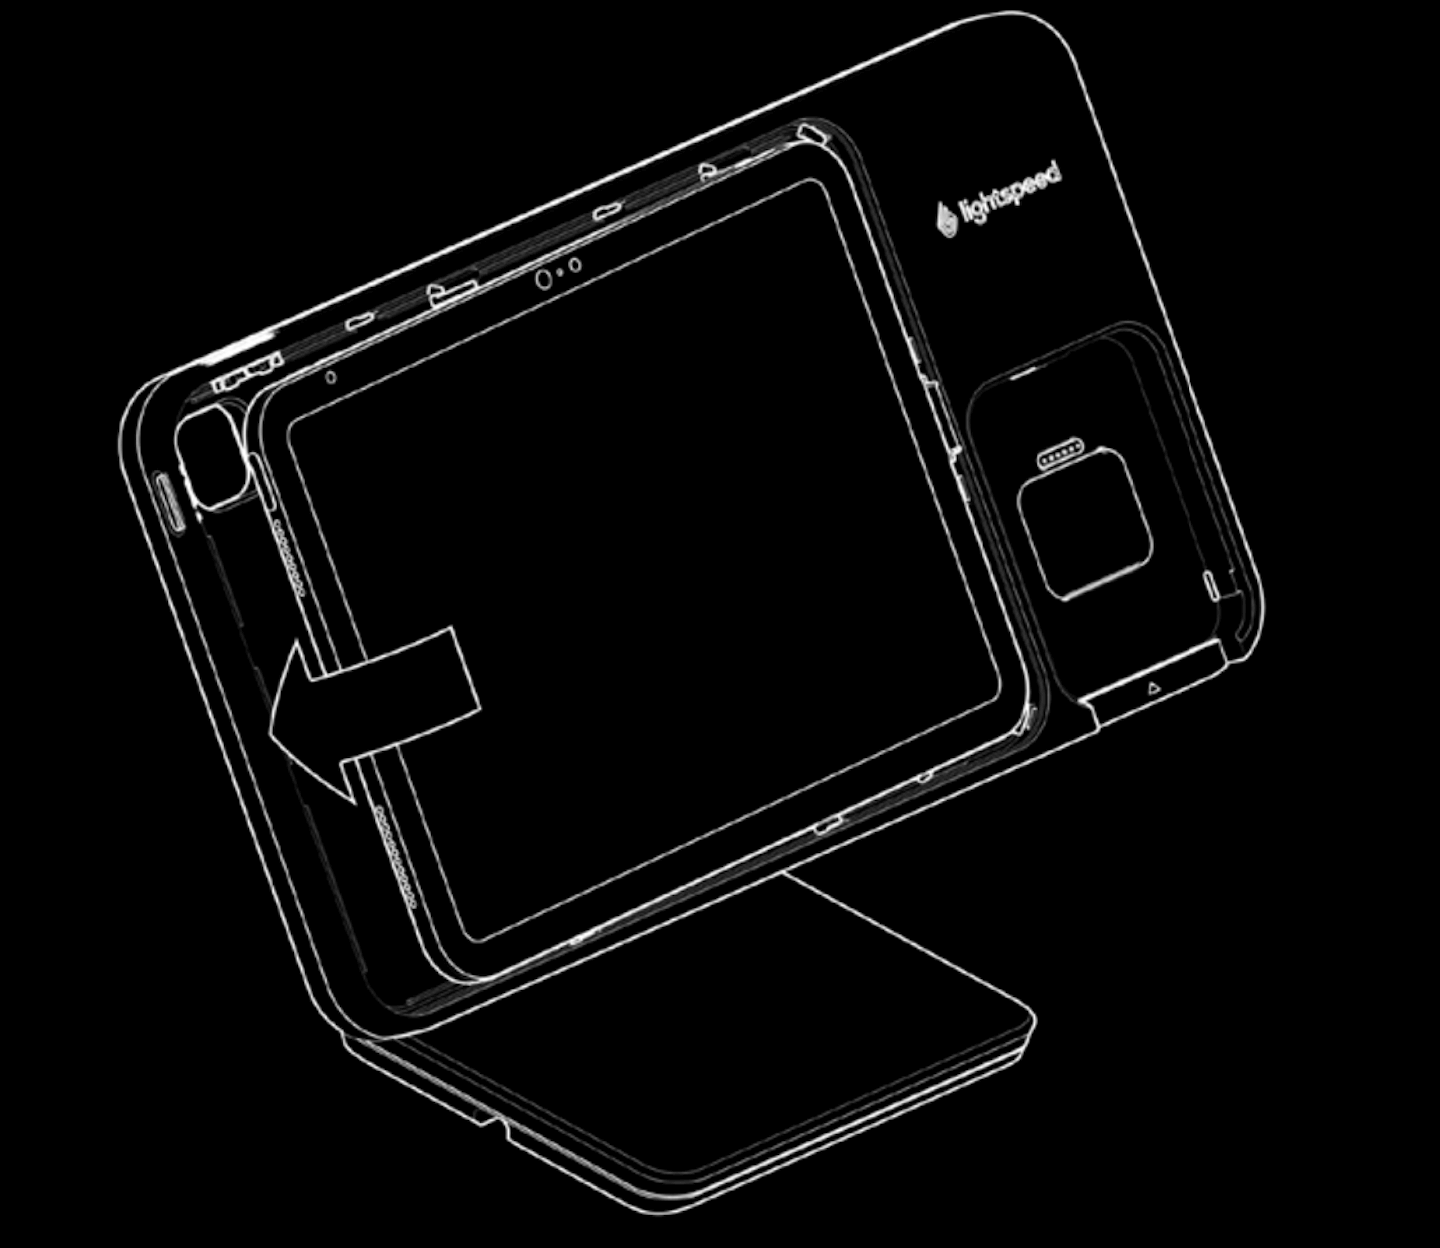 Illustration of Lightspeed Stand with Payments with iPad inserted. An arrow indicates that the iPad is being pushed flush with the stand.